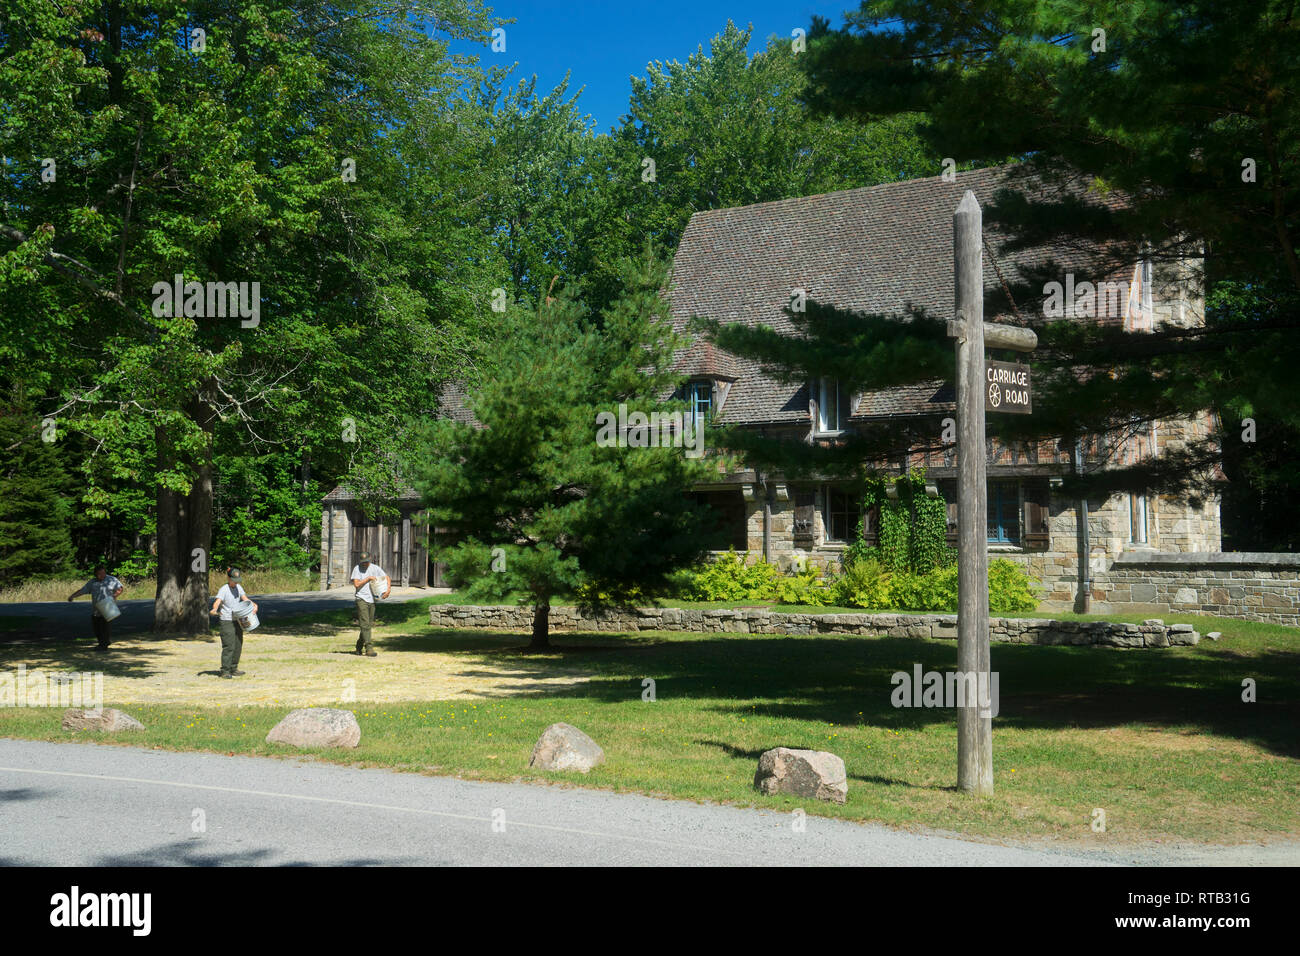 Park employees applying fertilizer to the lawn at Jordan Pond Gate House, Acadia National Park, Maine, USA. Stock Photo